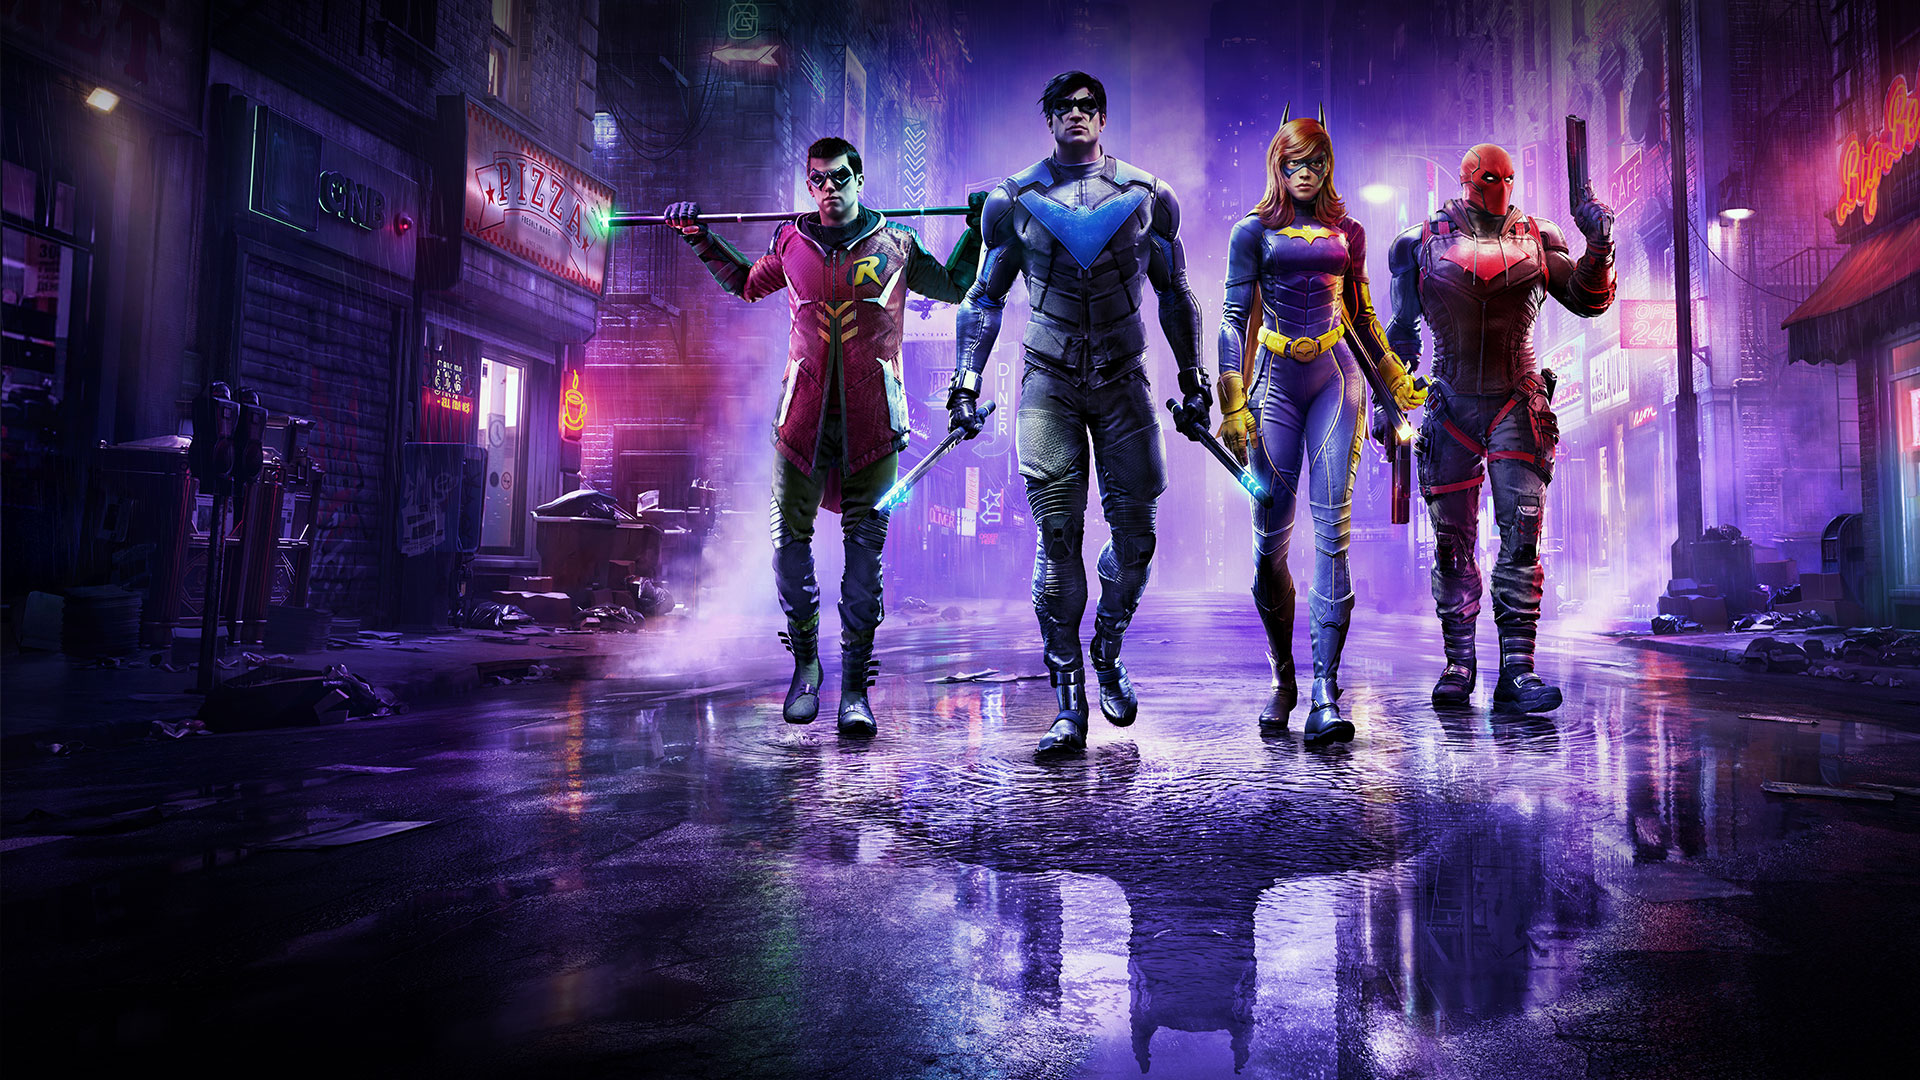 Robin, Nightwing, Batgirl and Red Hood walk through the rainy streets with Batman’s reflection below them in a puddle.